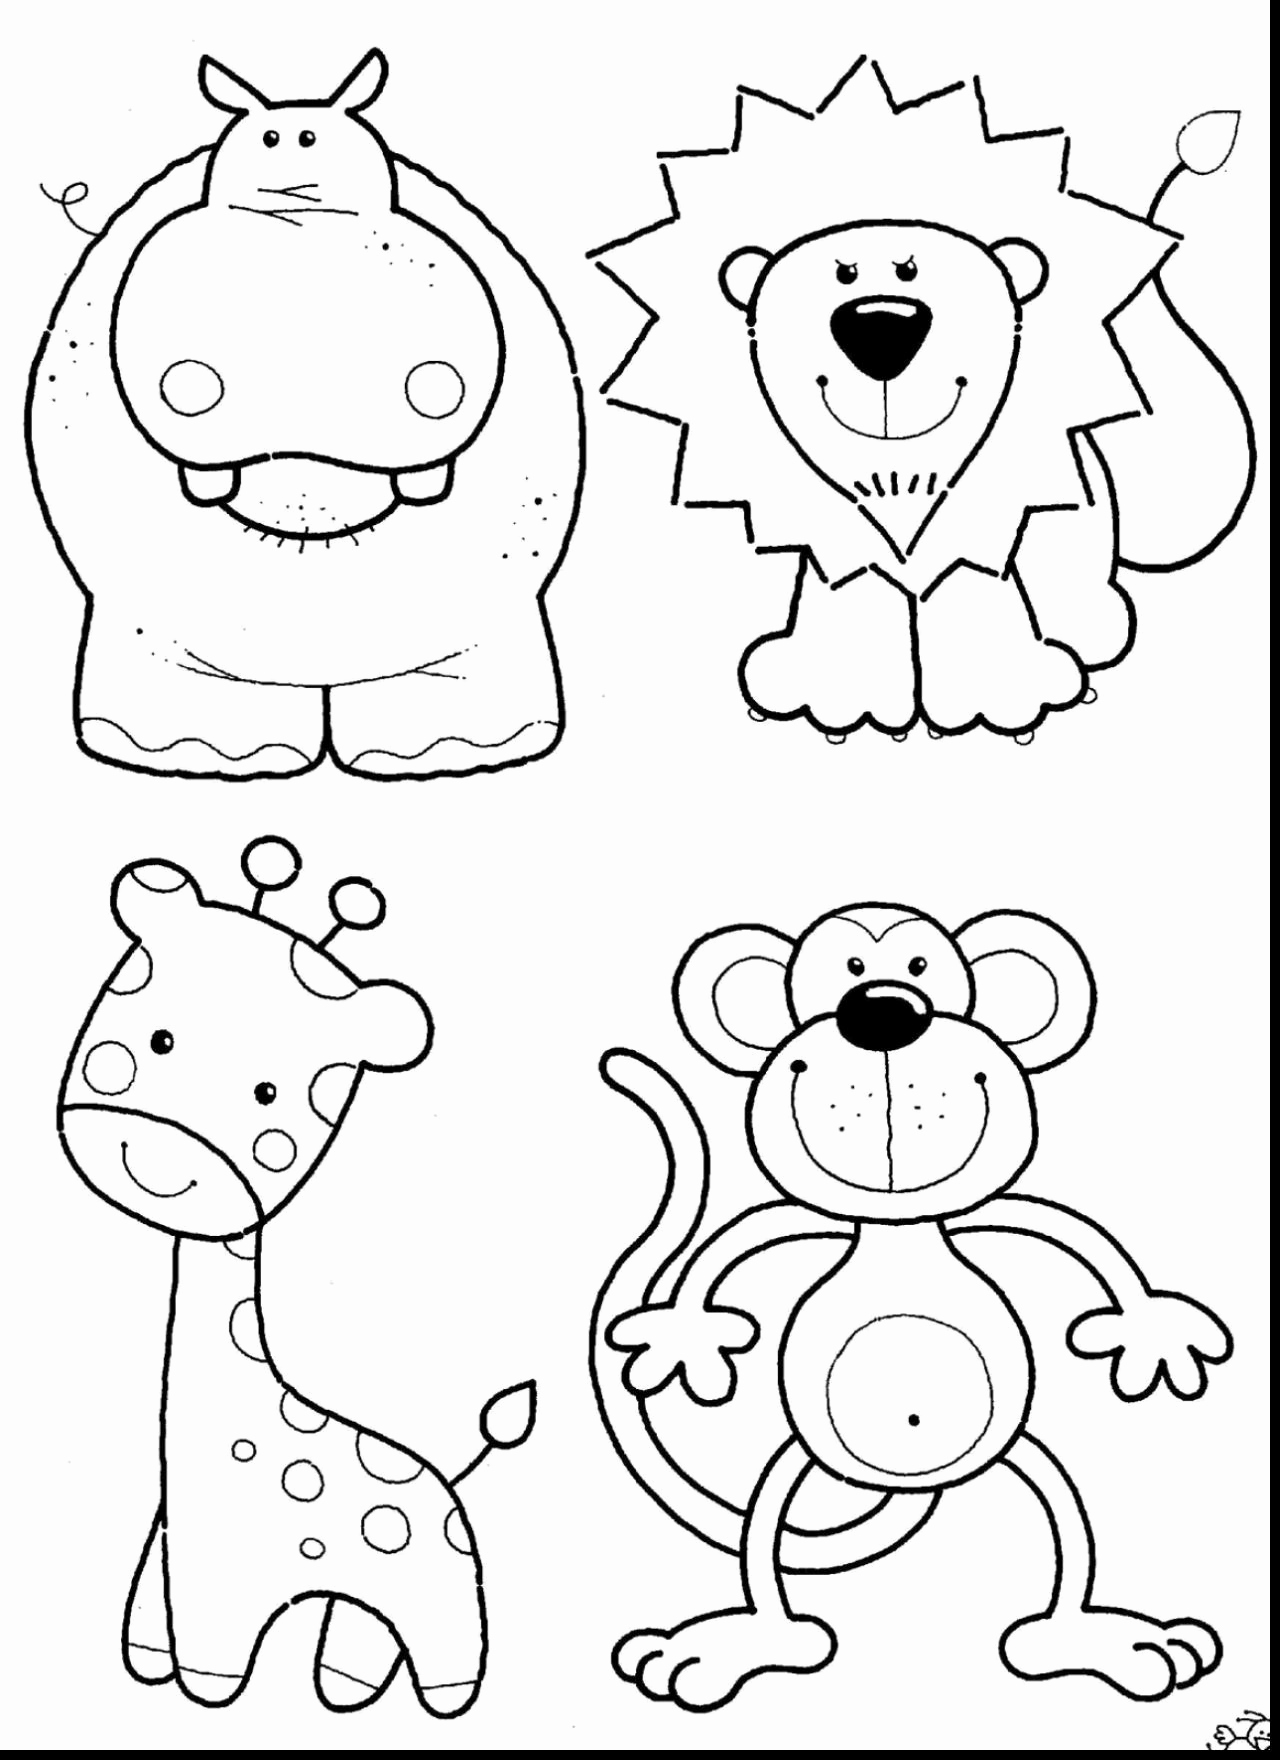 Grassland Animals Coloring Pages at Free printable